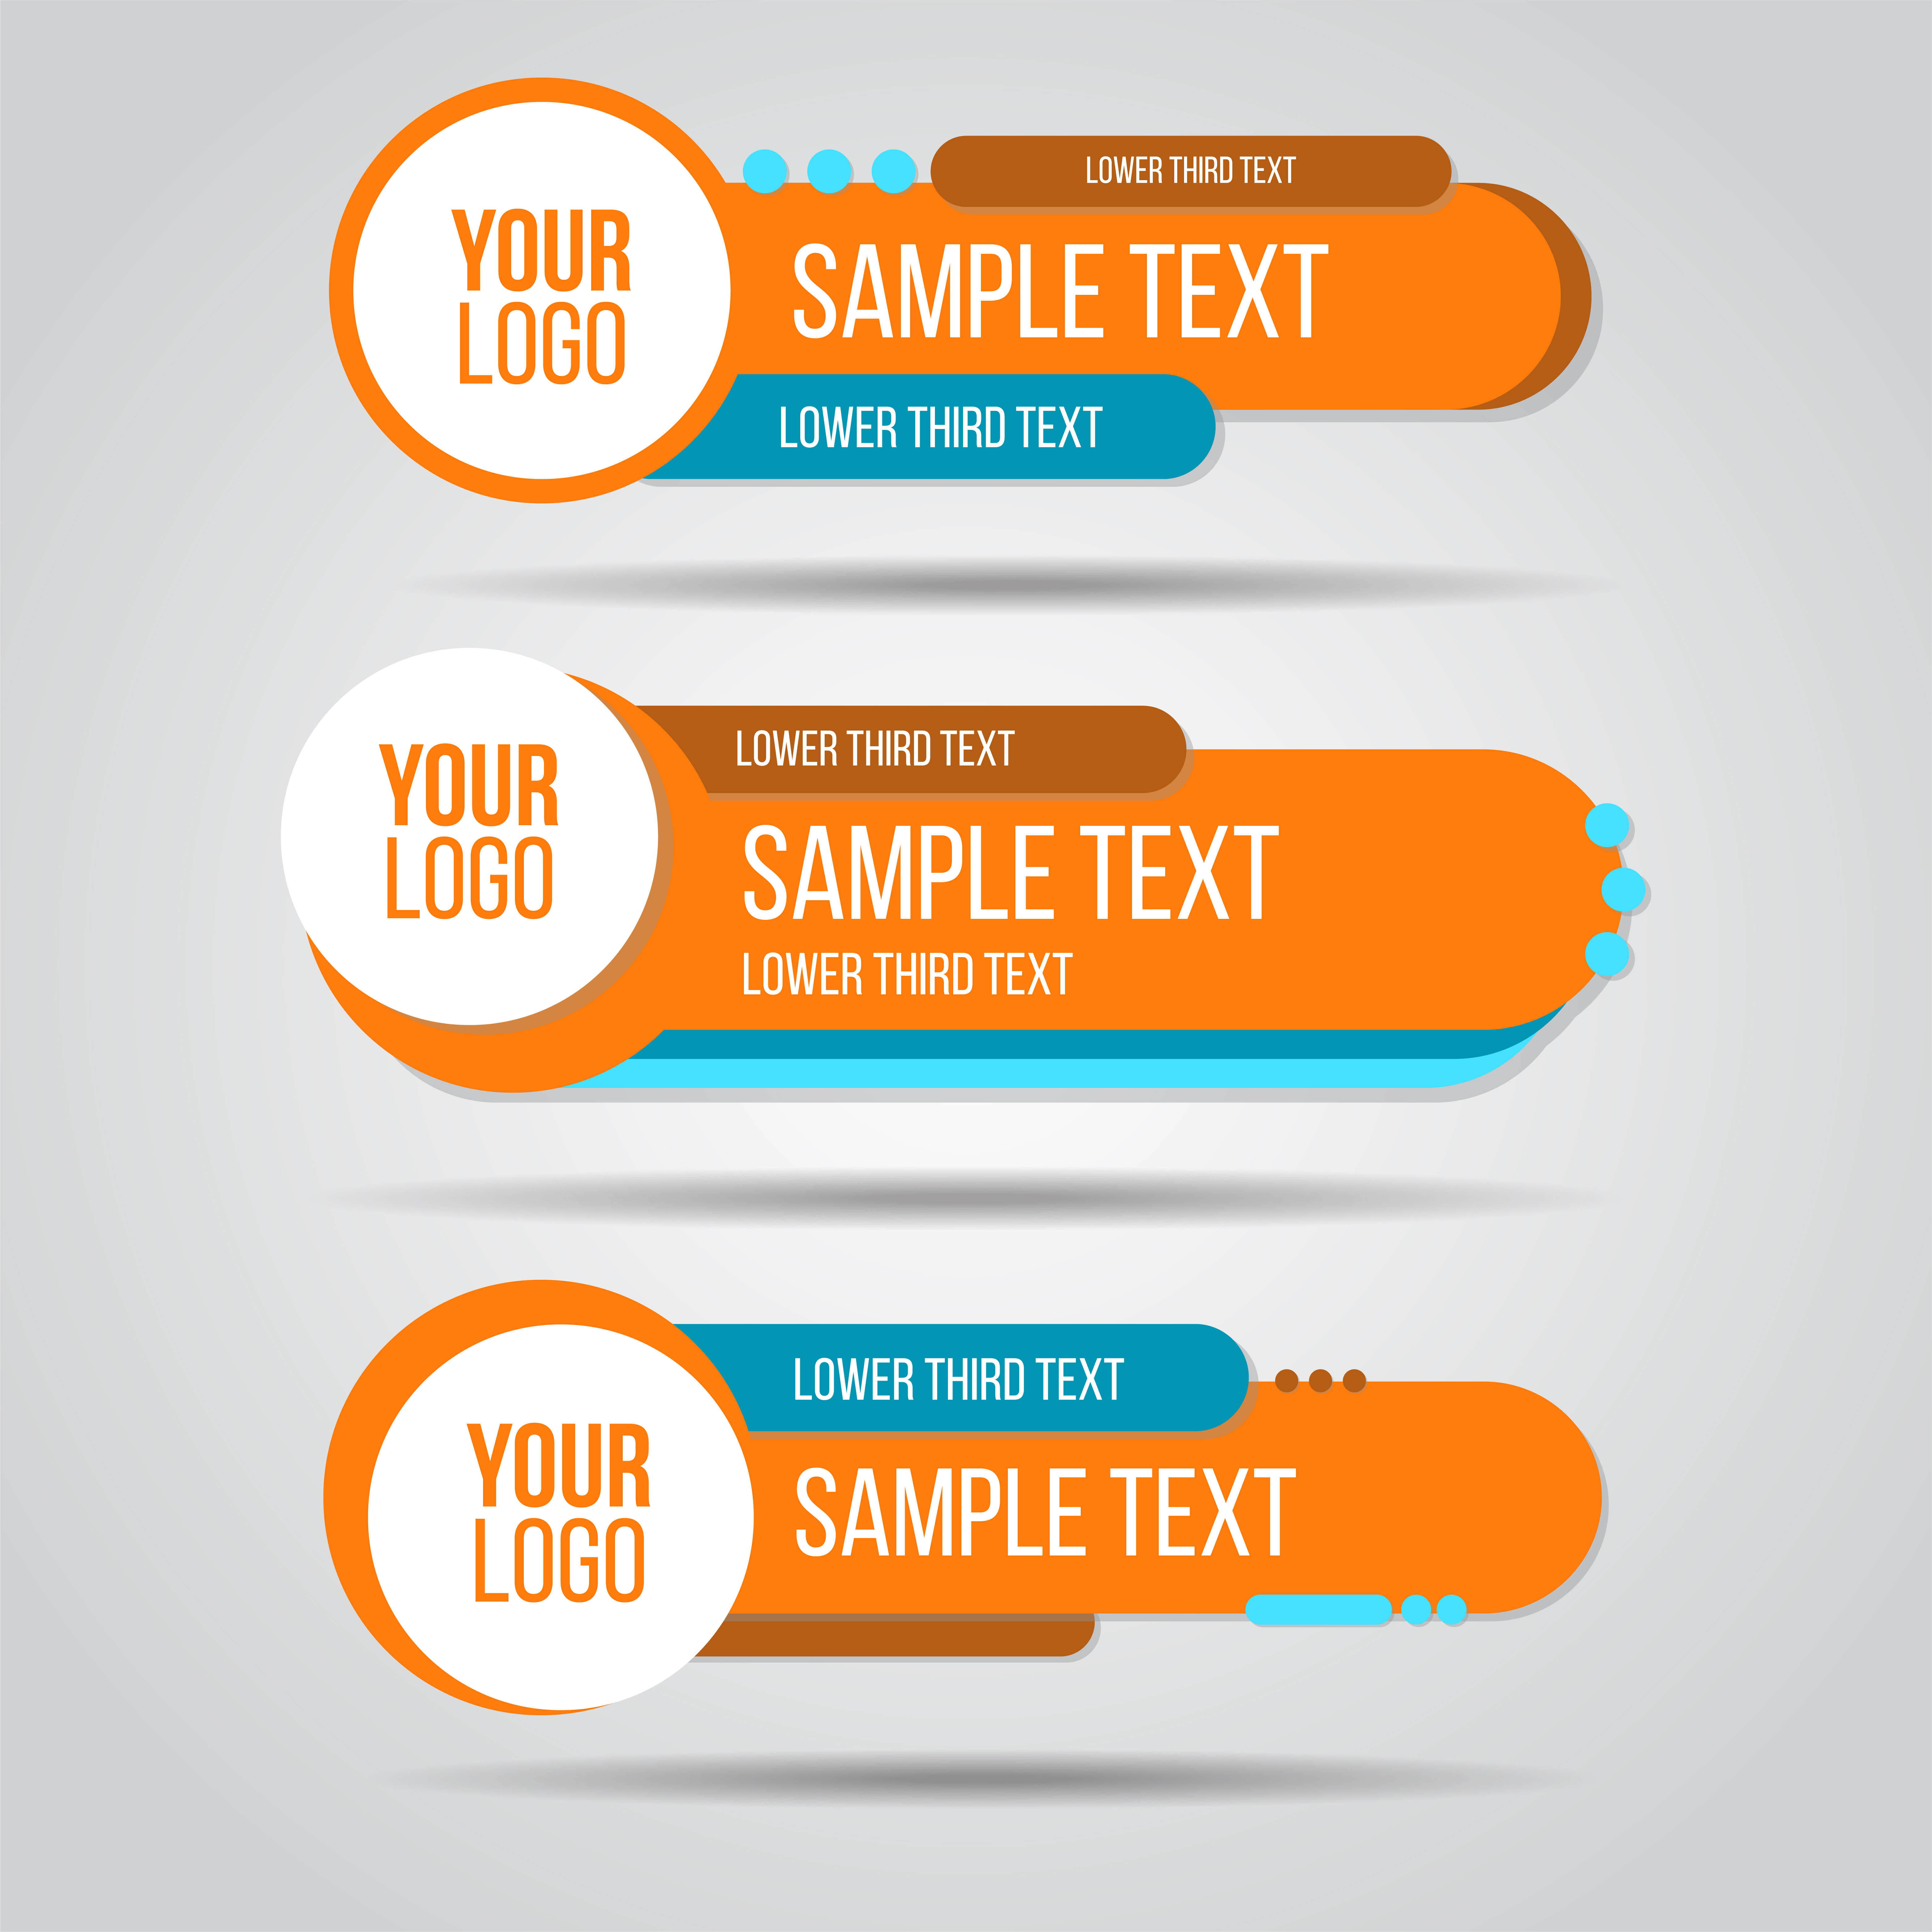 Lower Thirds Free Vector Art - (51 Free Downloads)